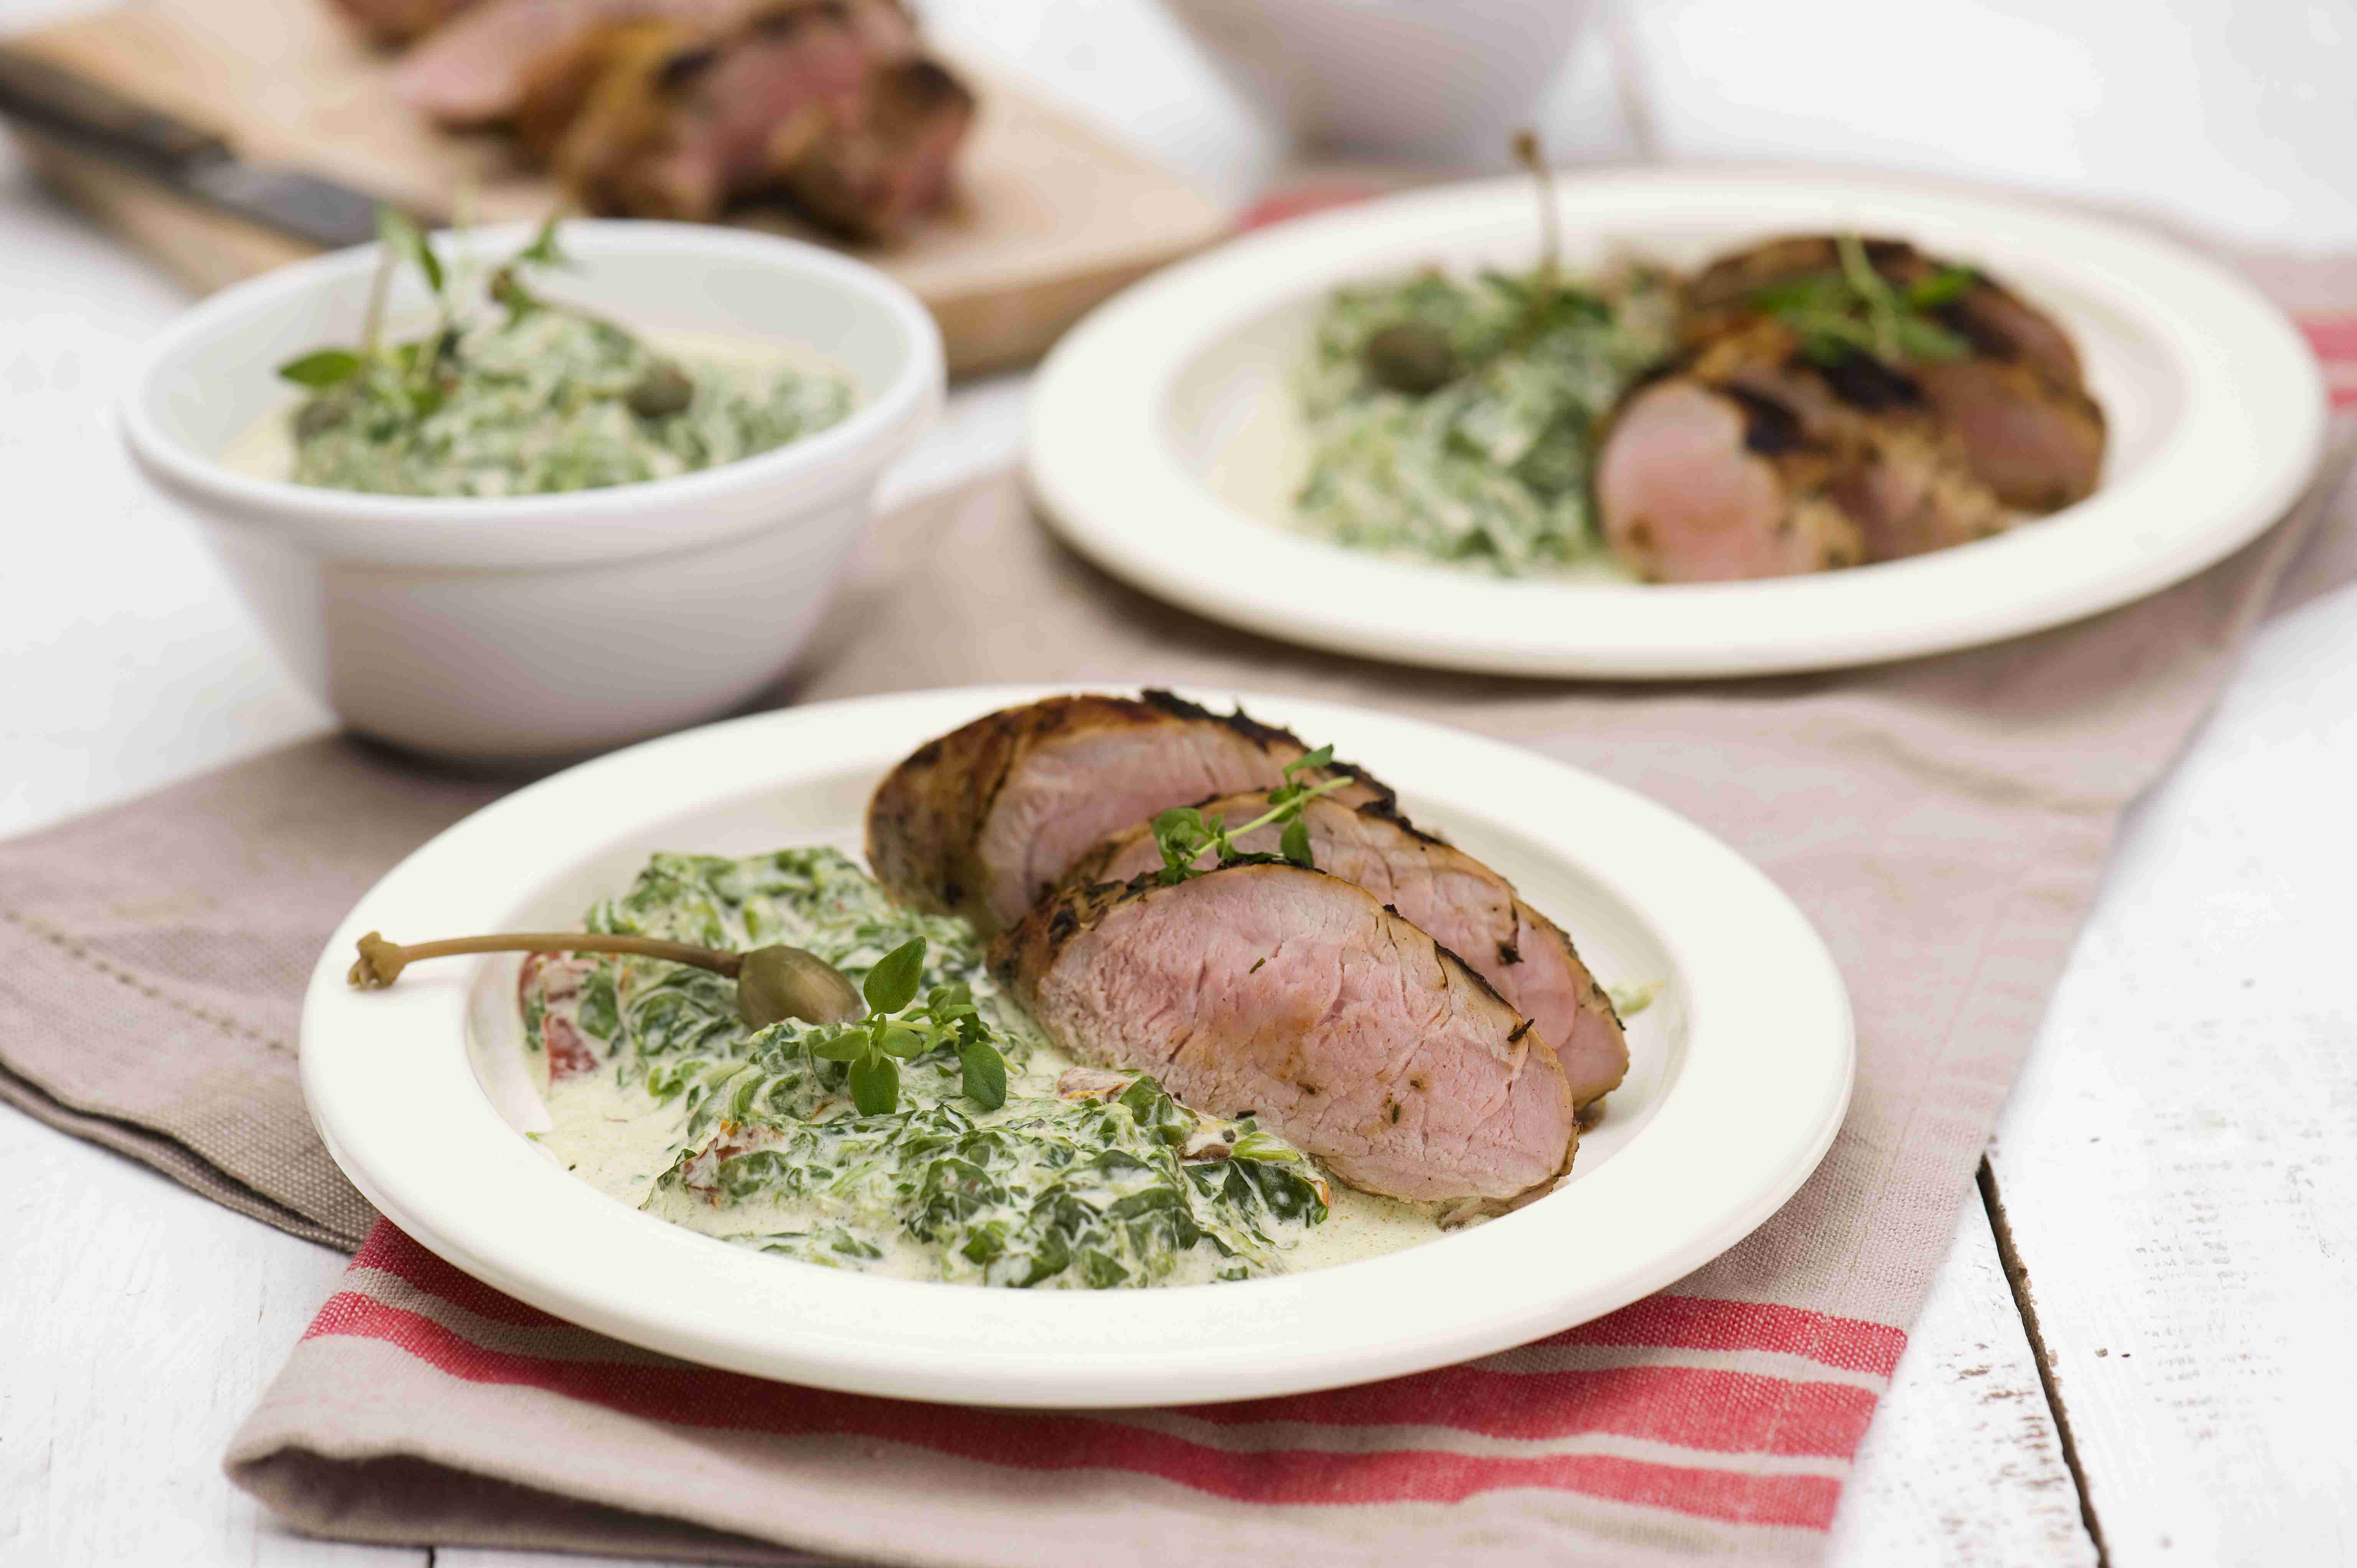 Marinated pork tenderloin steaks with spinach and cheese sauce